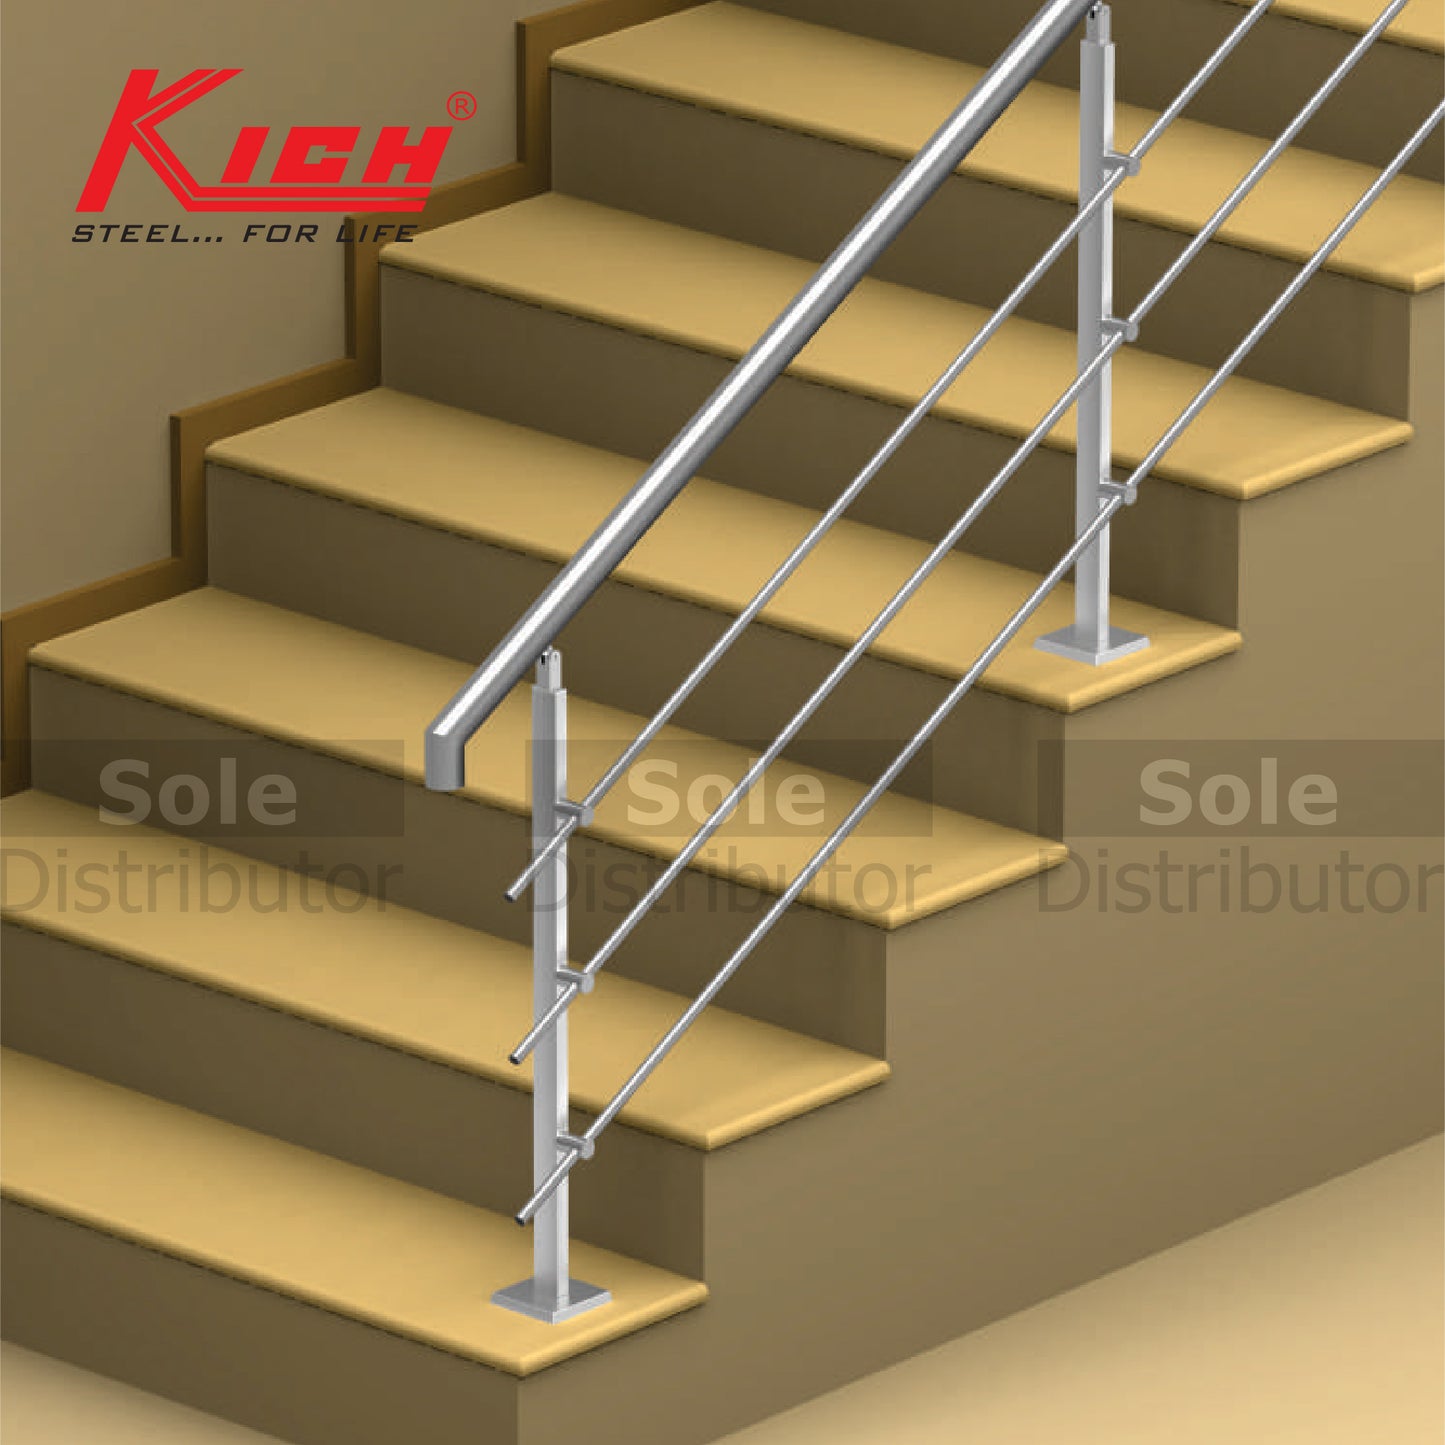 Kich Top Mounted Rectangle Baluster System With Horizontal Member Stainless Steel 316 Grade - DT21-1-163